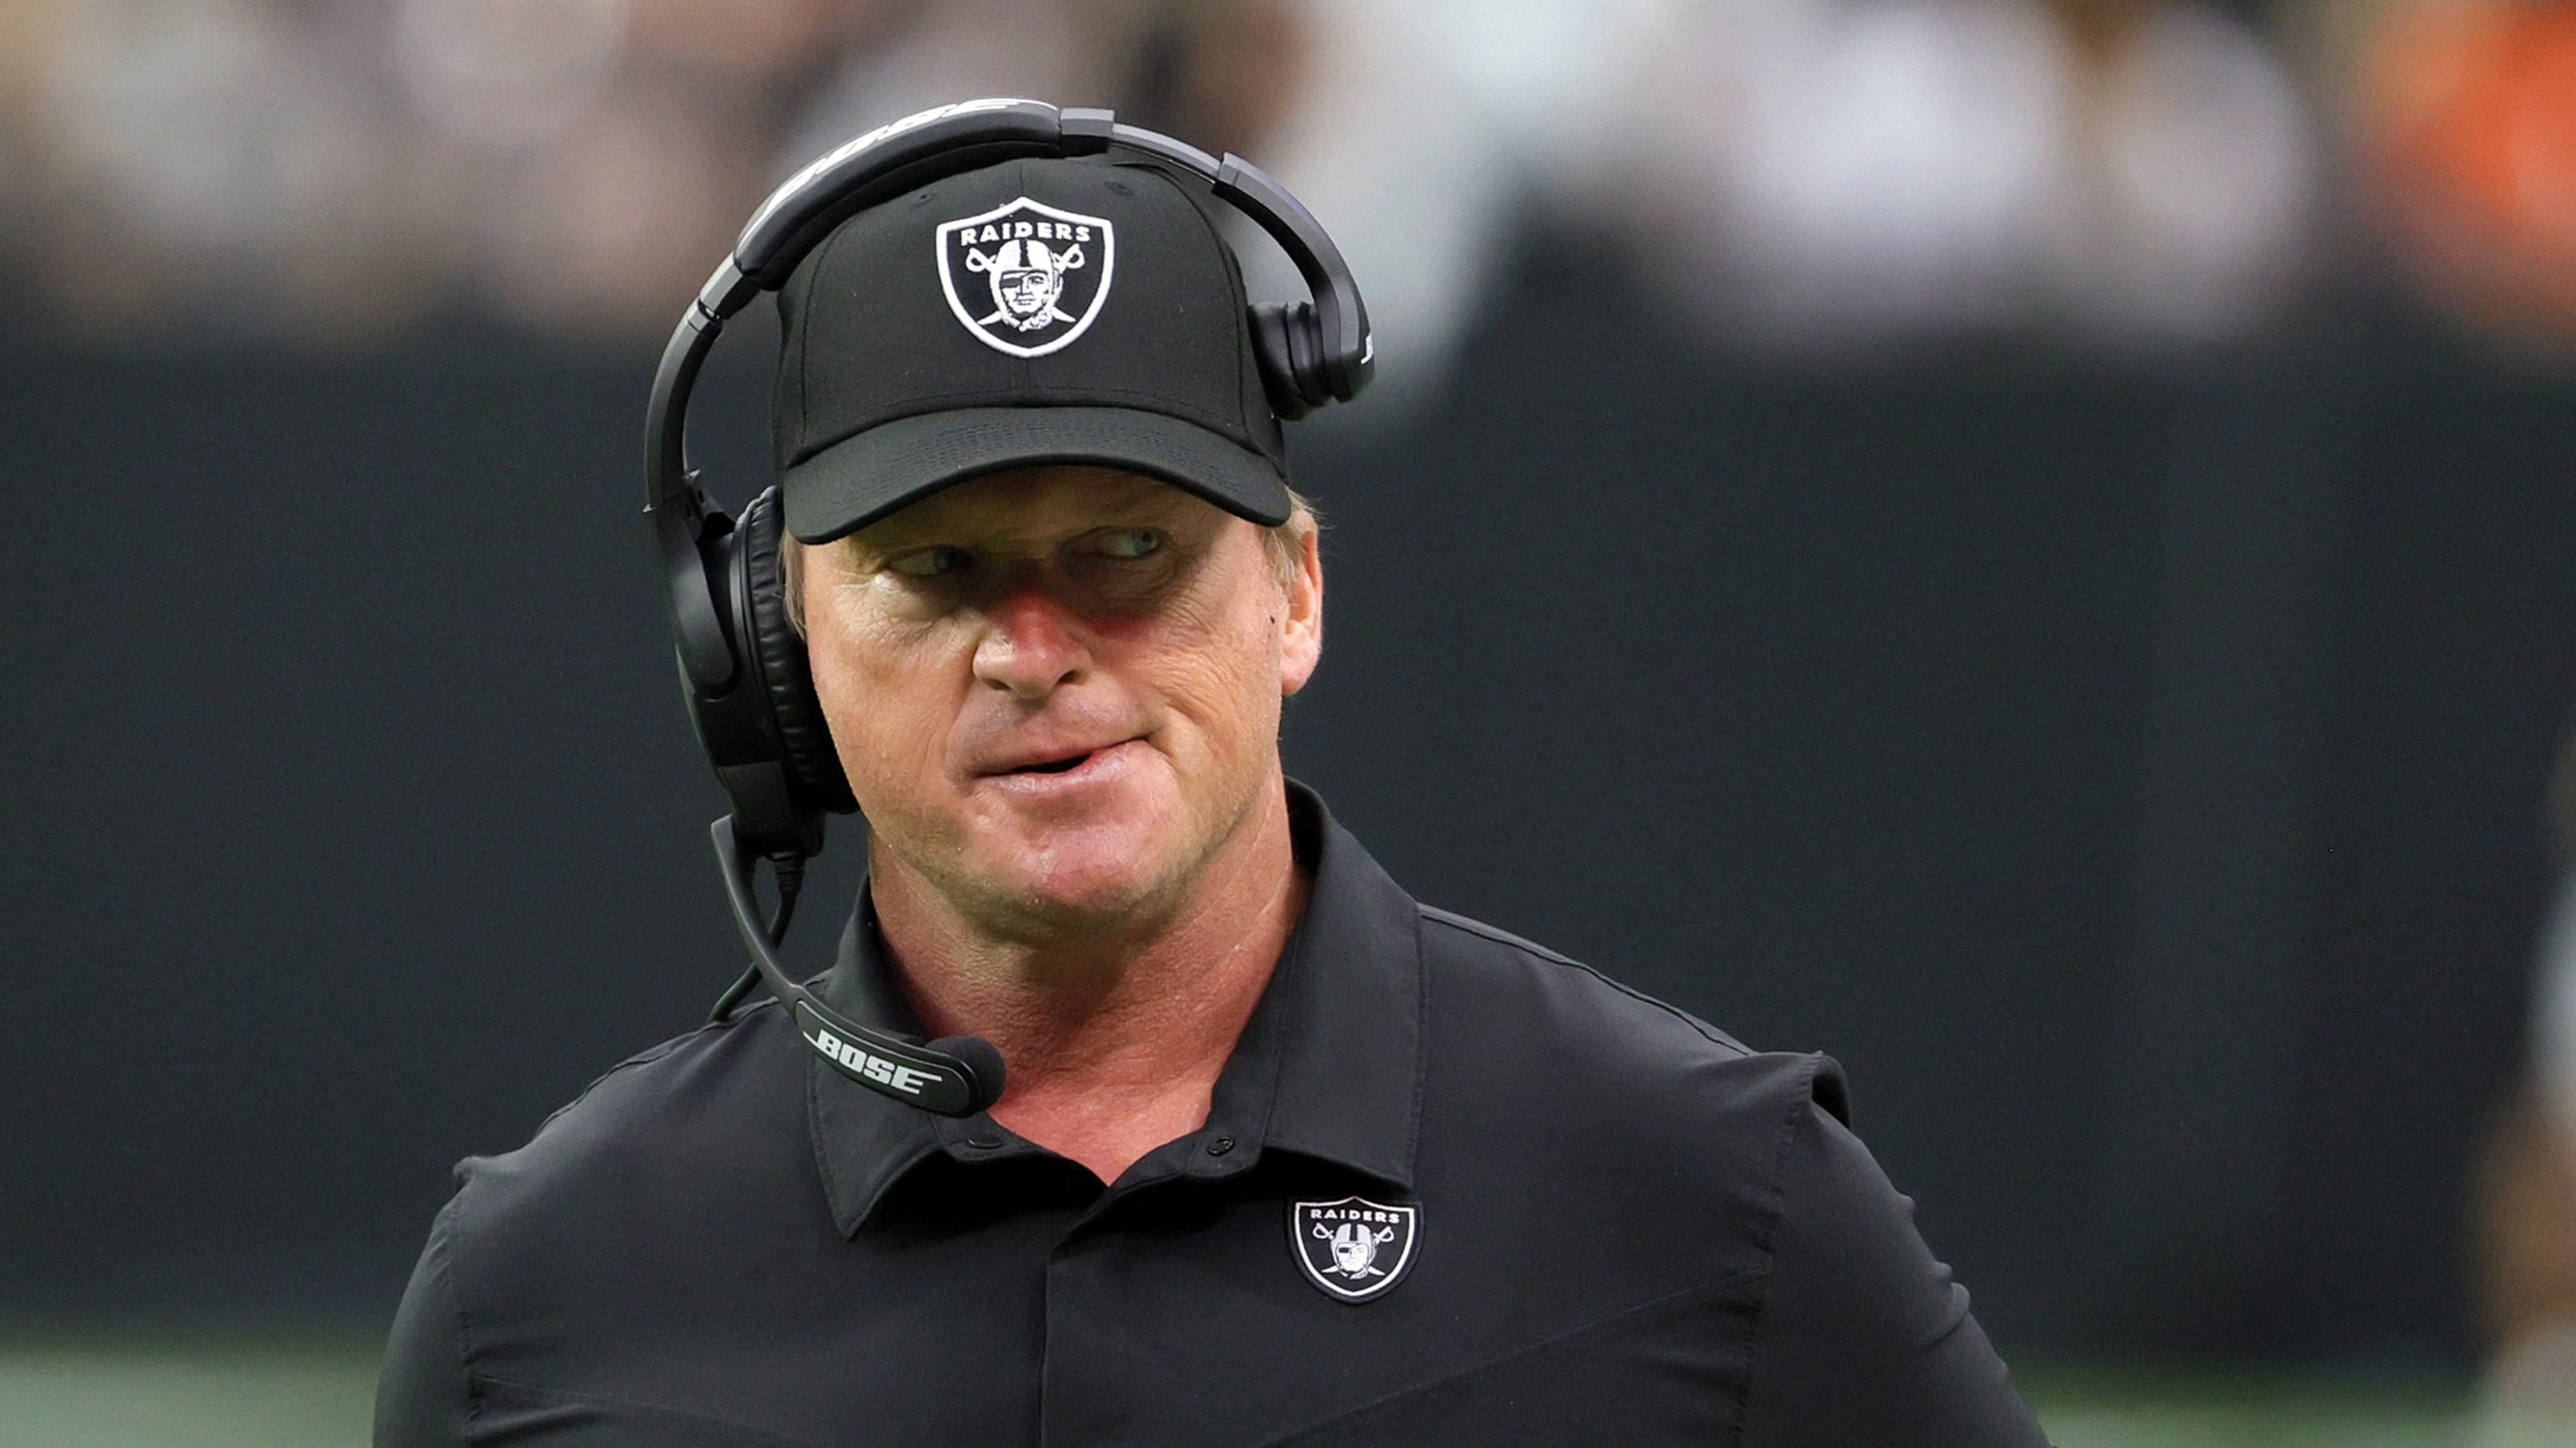 Then-head coach Jon Gruden of the Las Vegas Raiders reacts during a game against the Chicago Bears at Allegiant Stadium on October 10, 2021 in Las Vegas, Nevada.